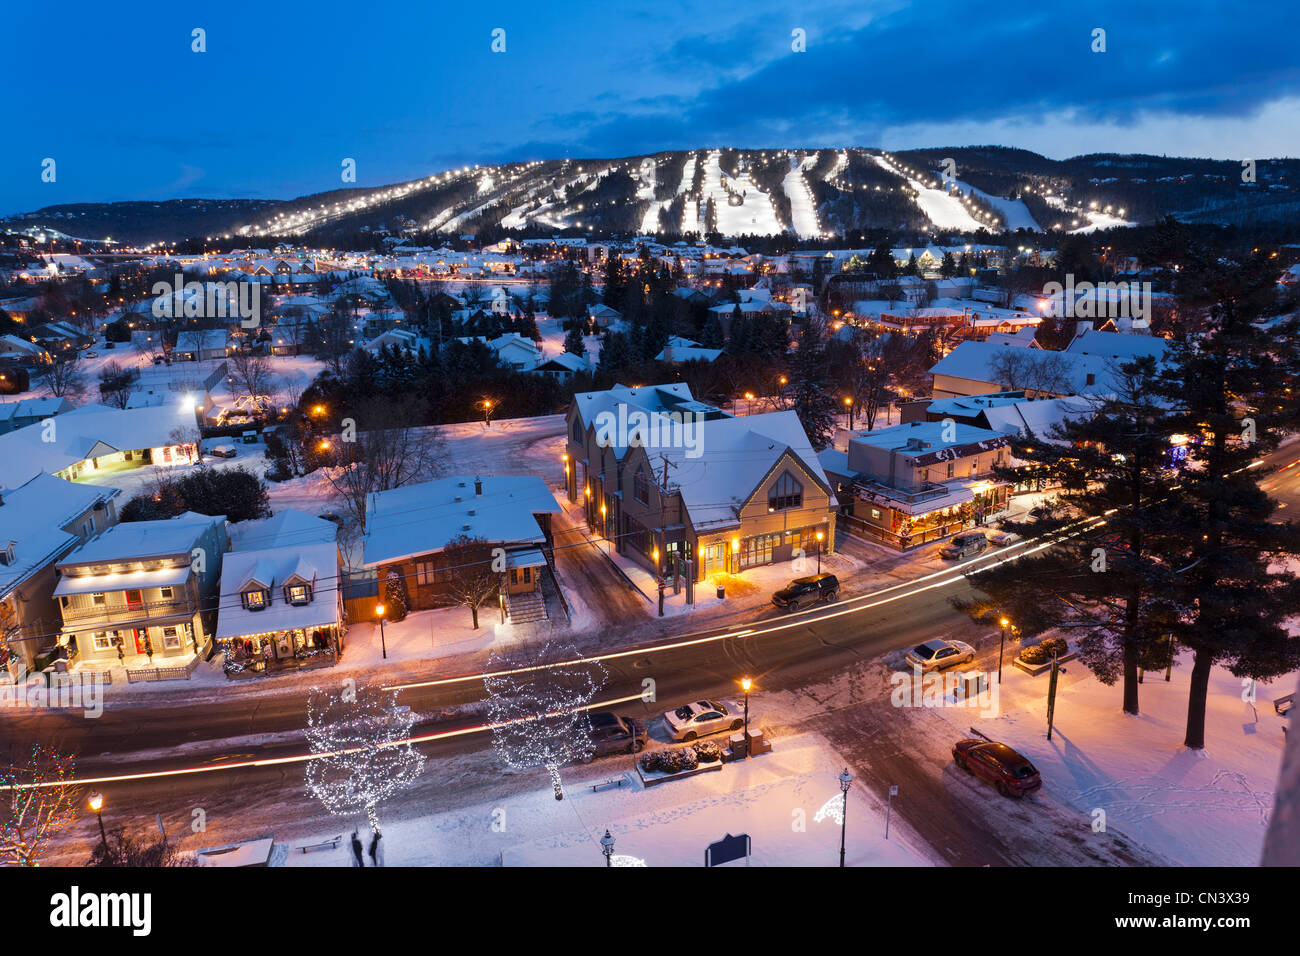 Be a Booker. Search hotels and more in Saint-Sauveur-des-Monts